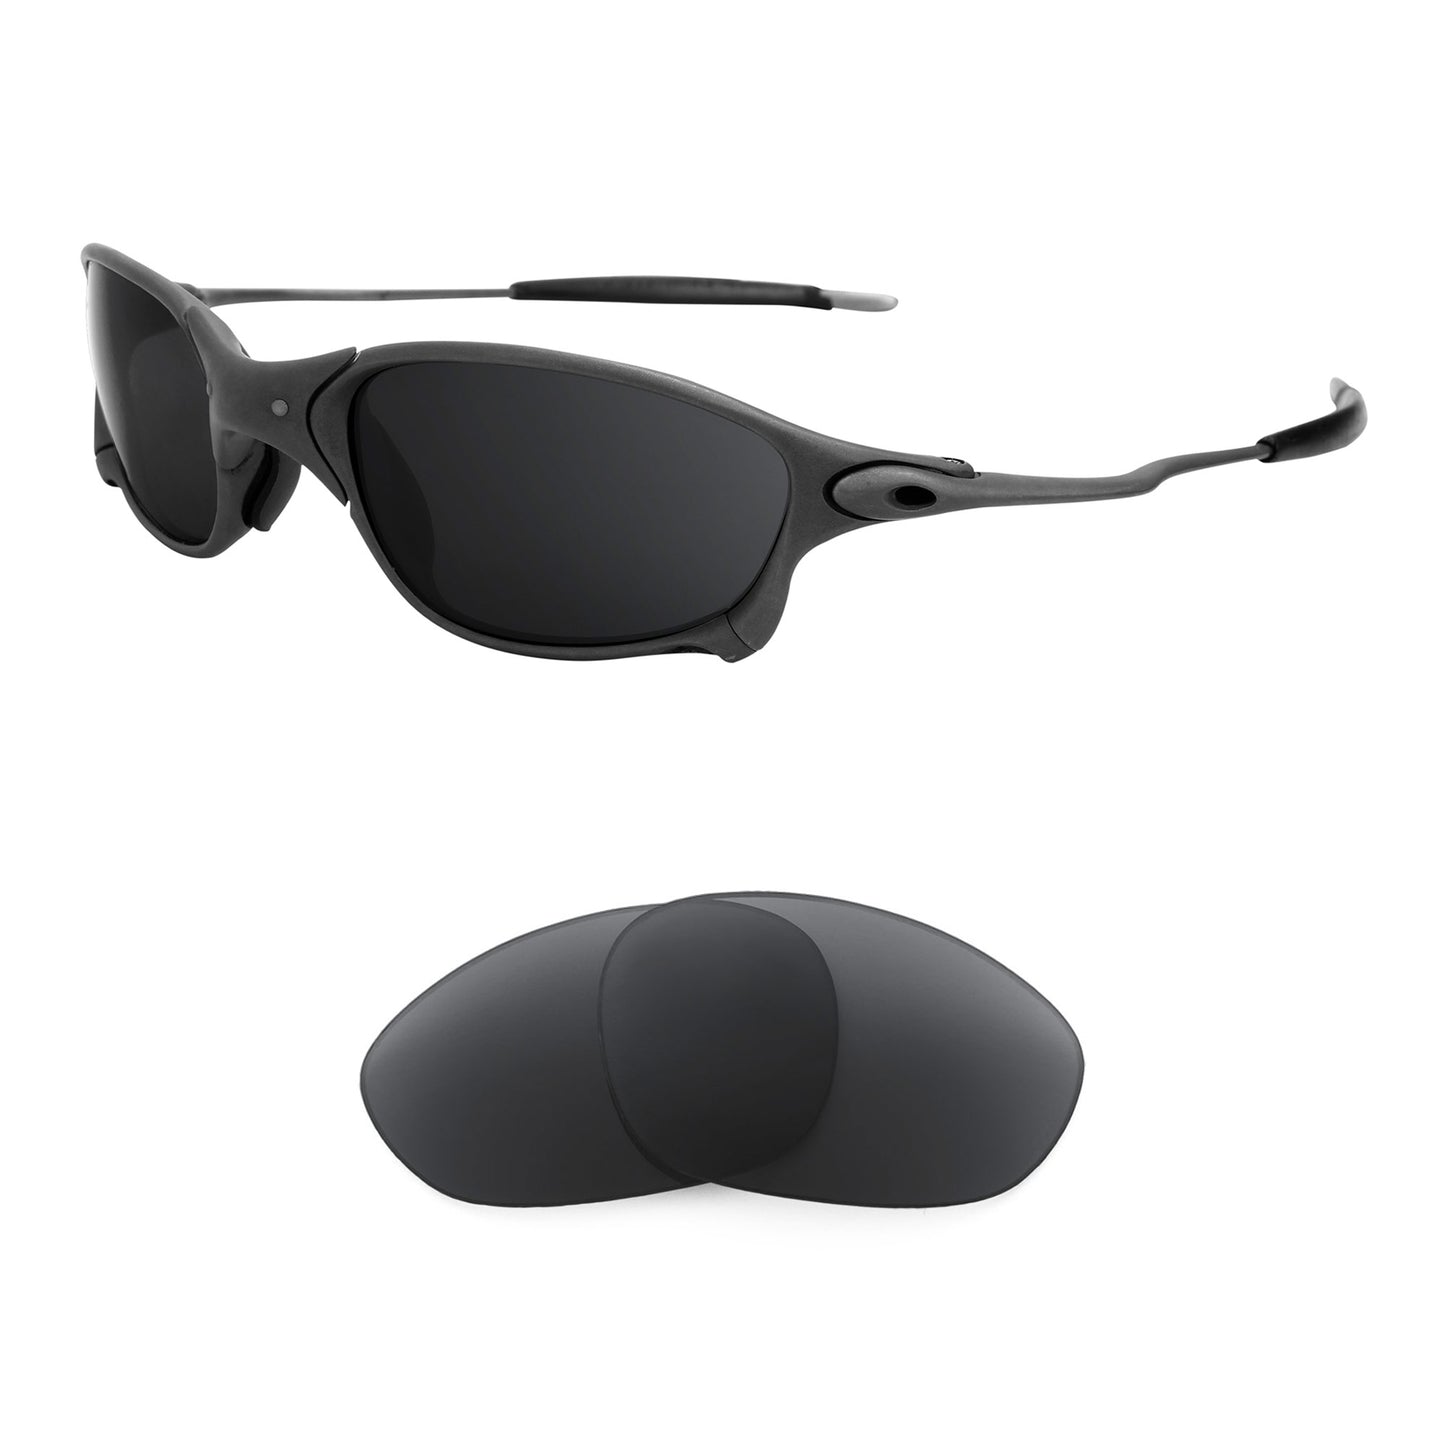 Oakley X Metal XX sunglasses with replacement lenses